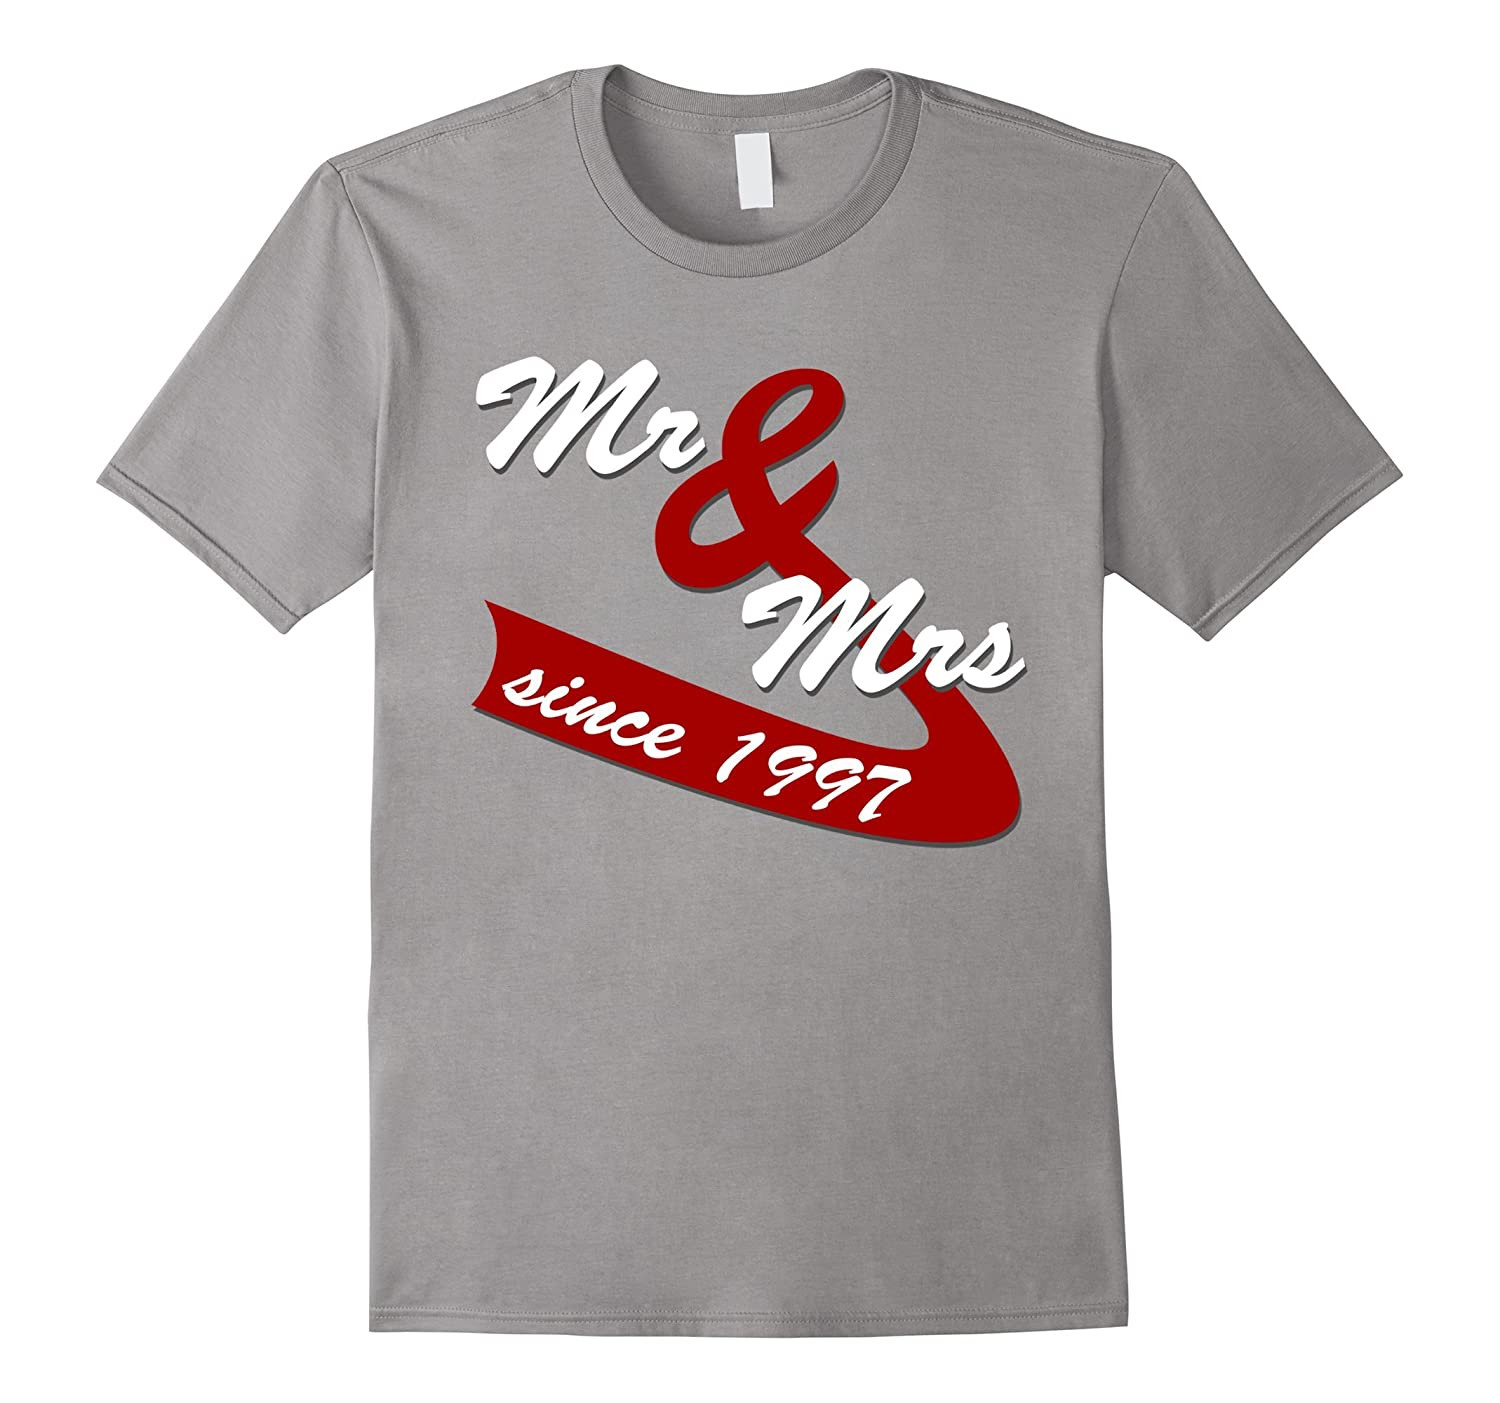 20Th Wedding Anniversary Gift Ideas For Couple
 20th Wedding Anniversary Gift Ideas Couples T shirt PL